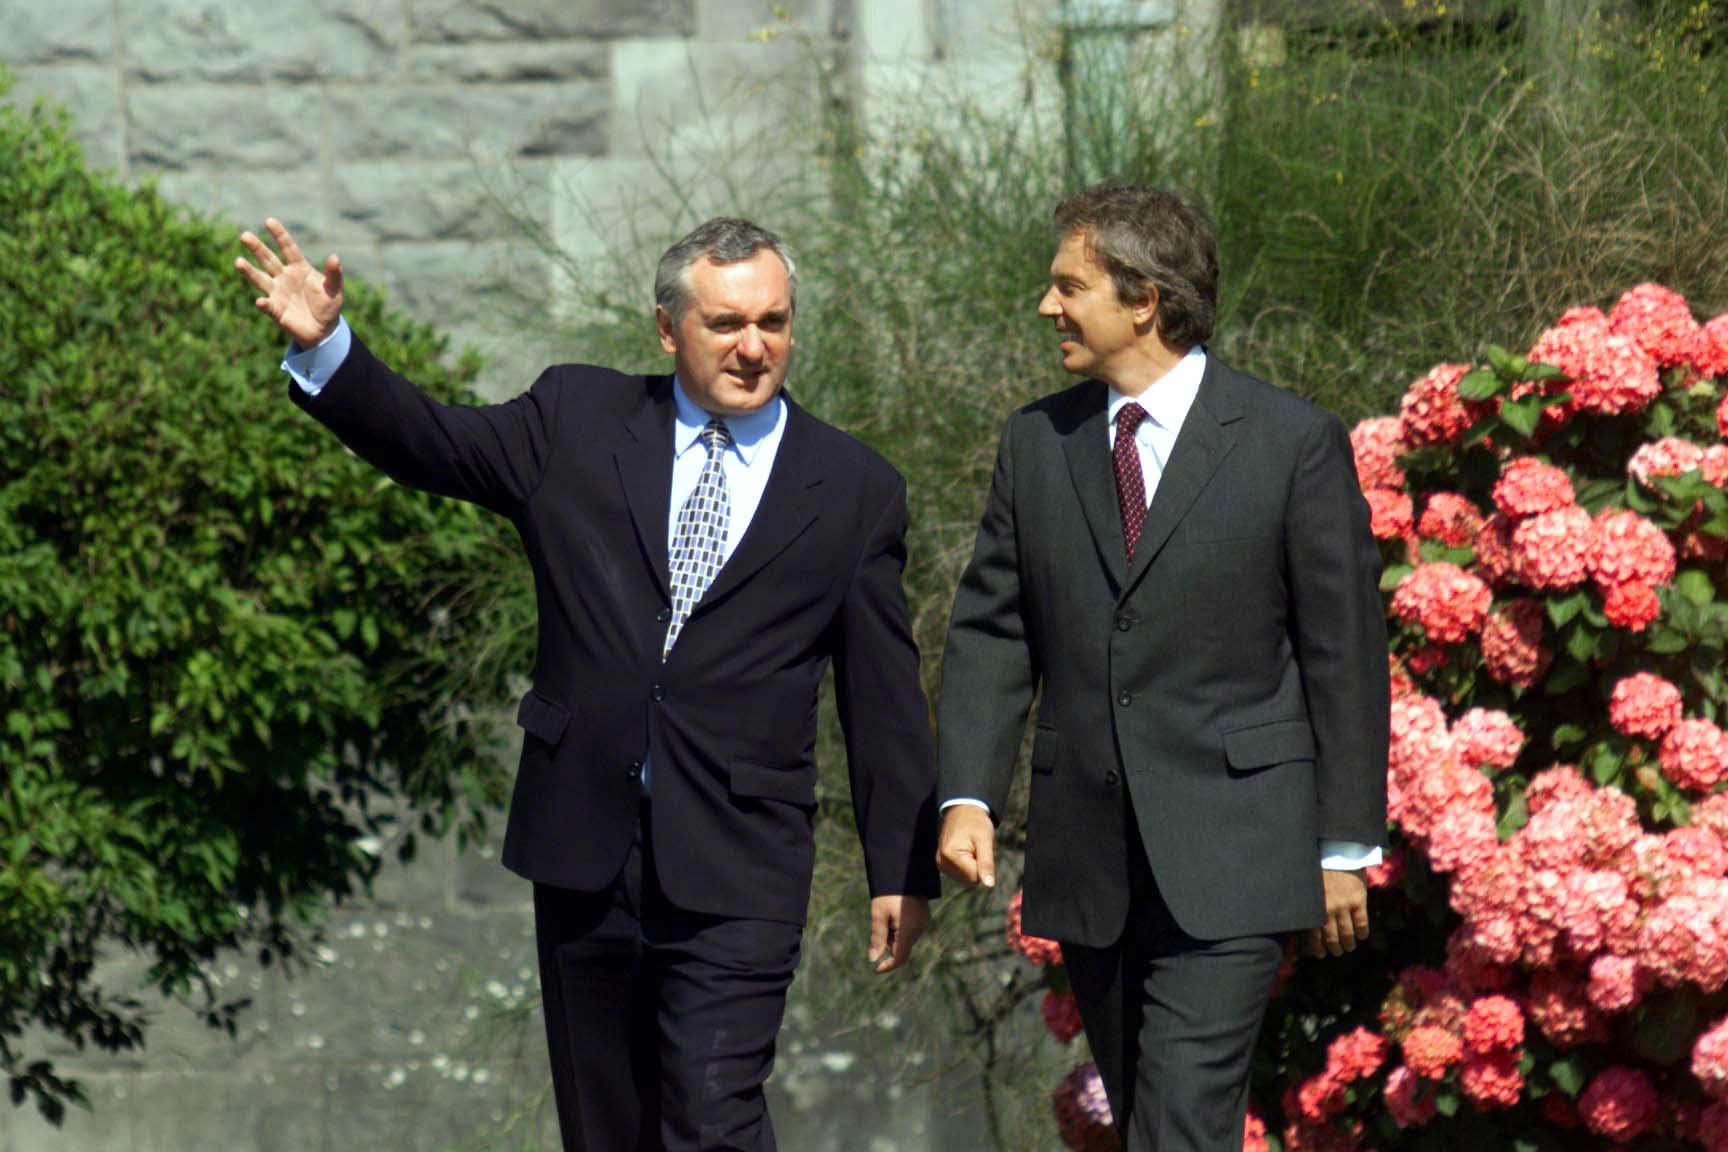 Tony Blair with Irish prime minister Bertie Ahern after having talks at Ashford Castle, Co Mayo, in 1998 (Chris Bacon/PA)